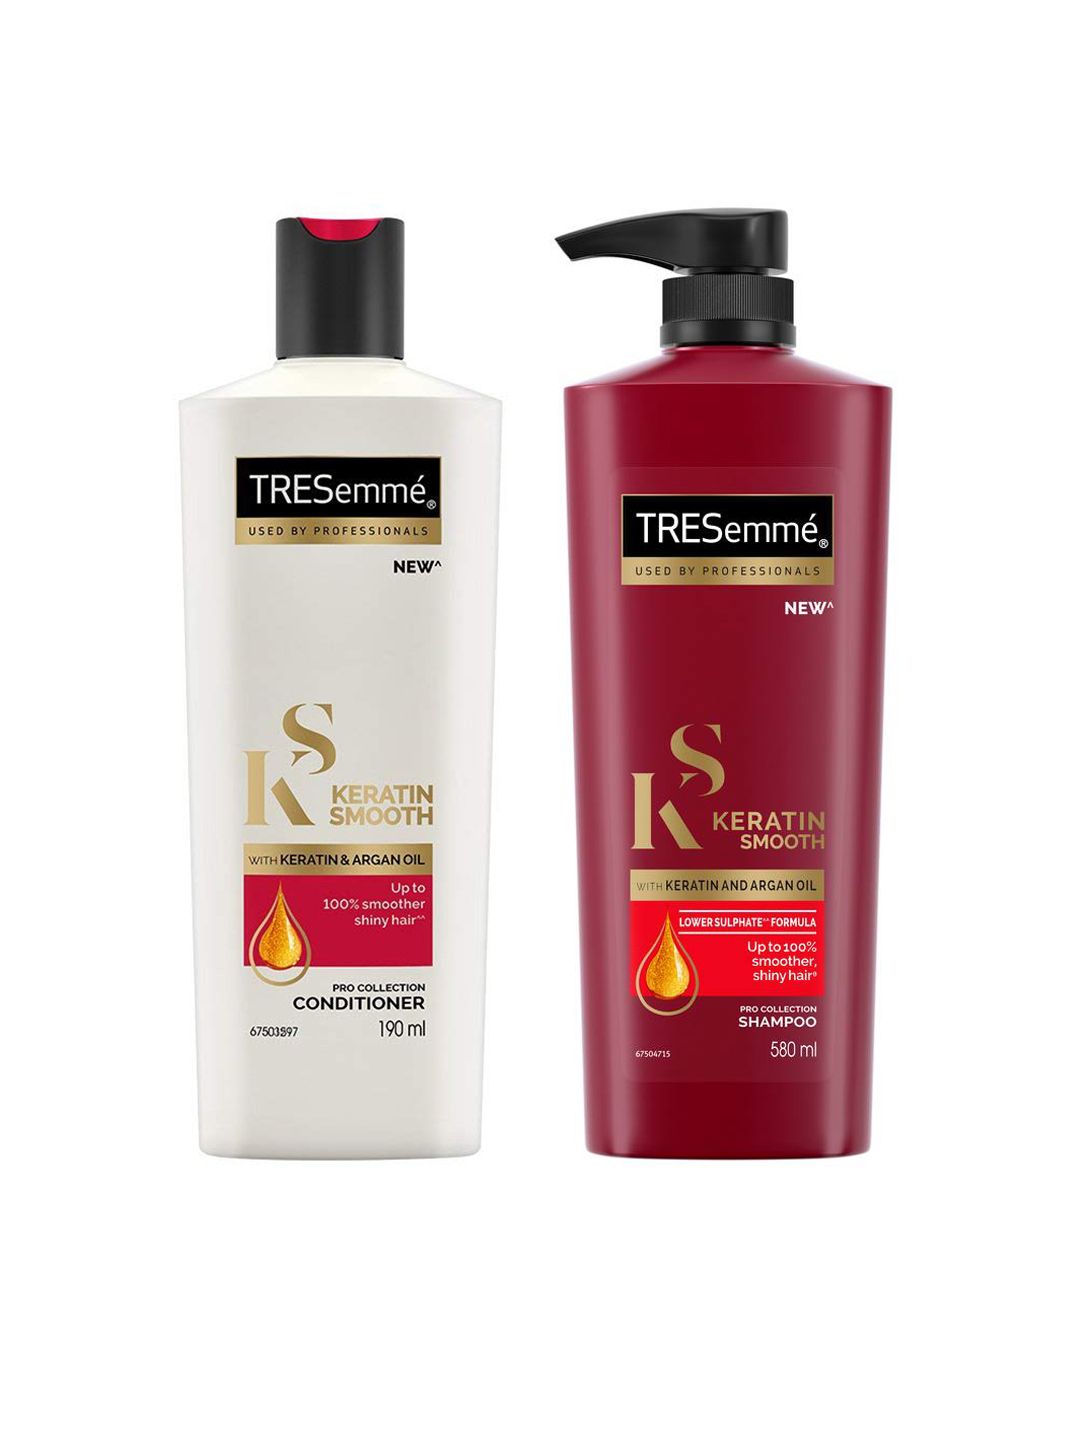 TRESemme Set Of Keratin Smooth Shampoo & Conditioner Price in India